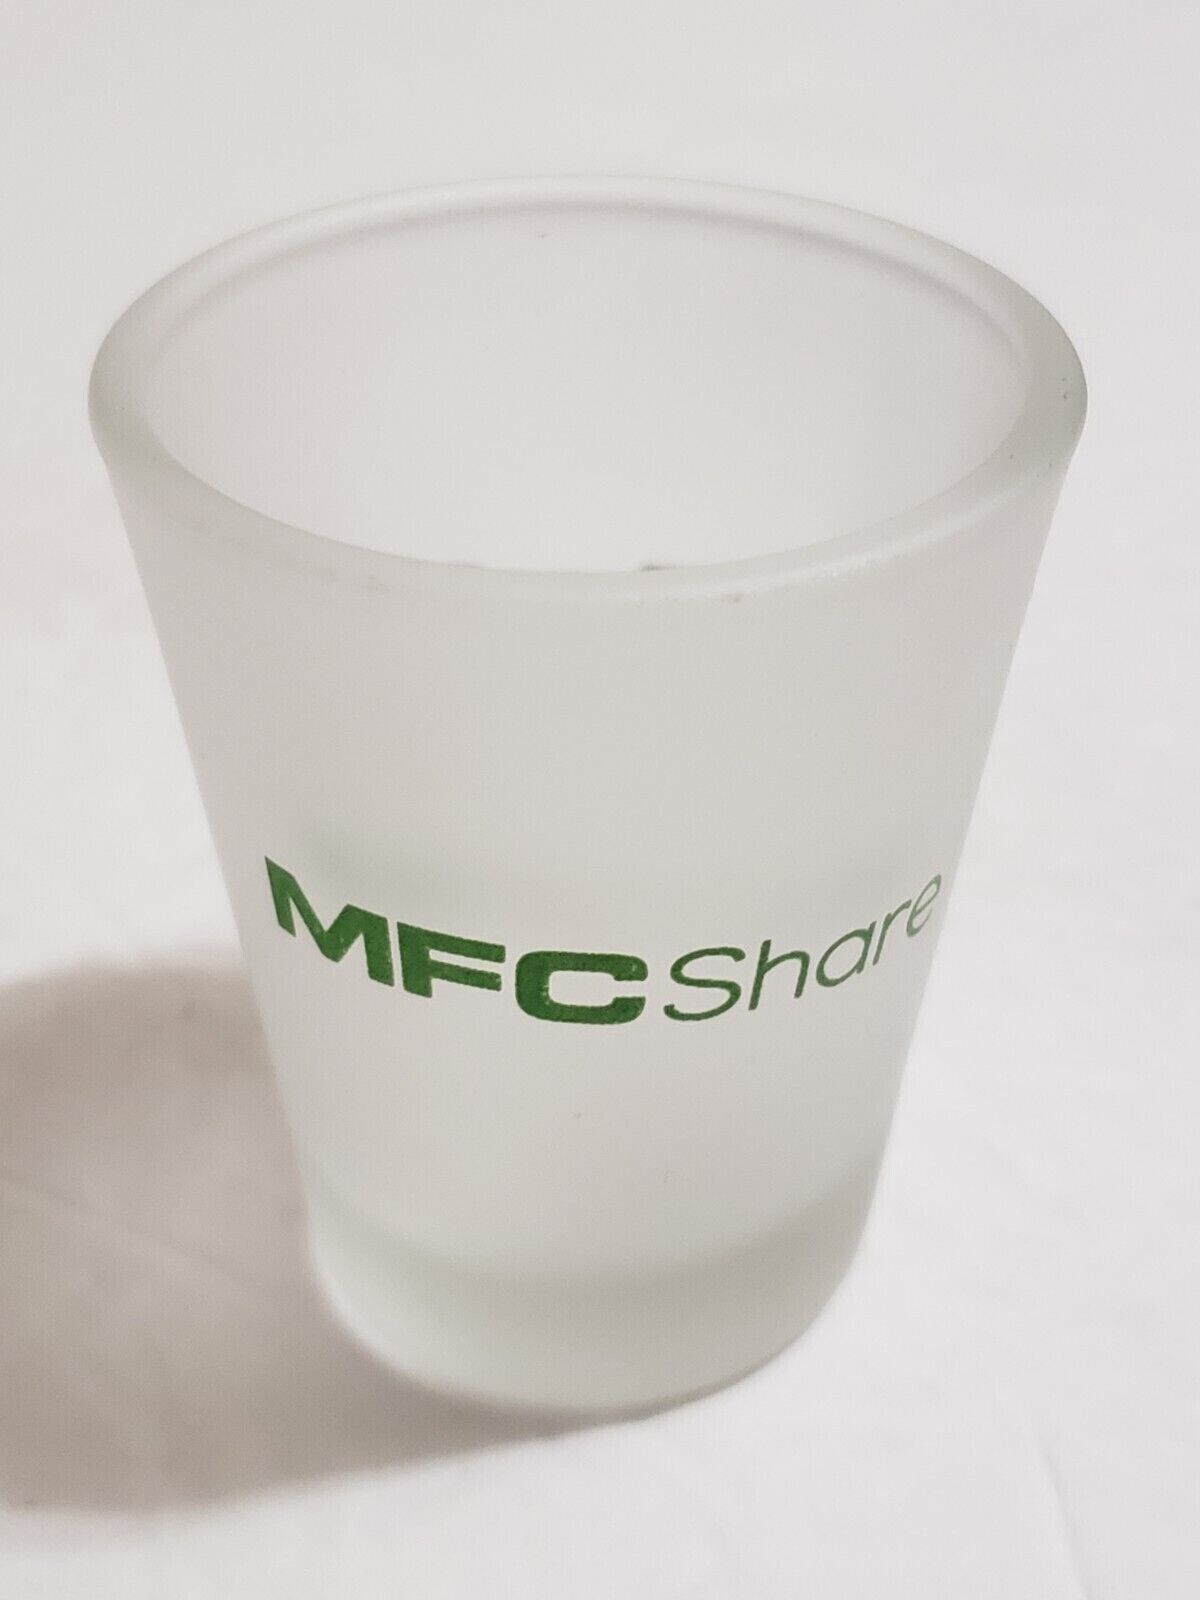 NEW My Free Cams Frosted Shot Glass MFC Share MyFreeCams com AVN AEE Swag